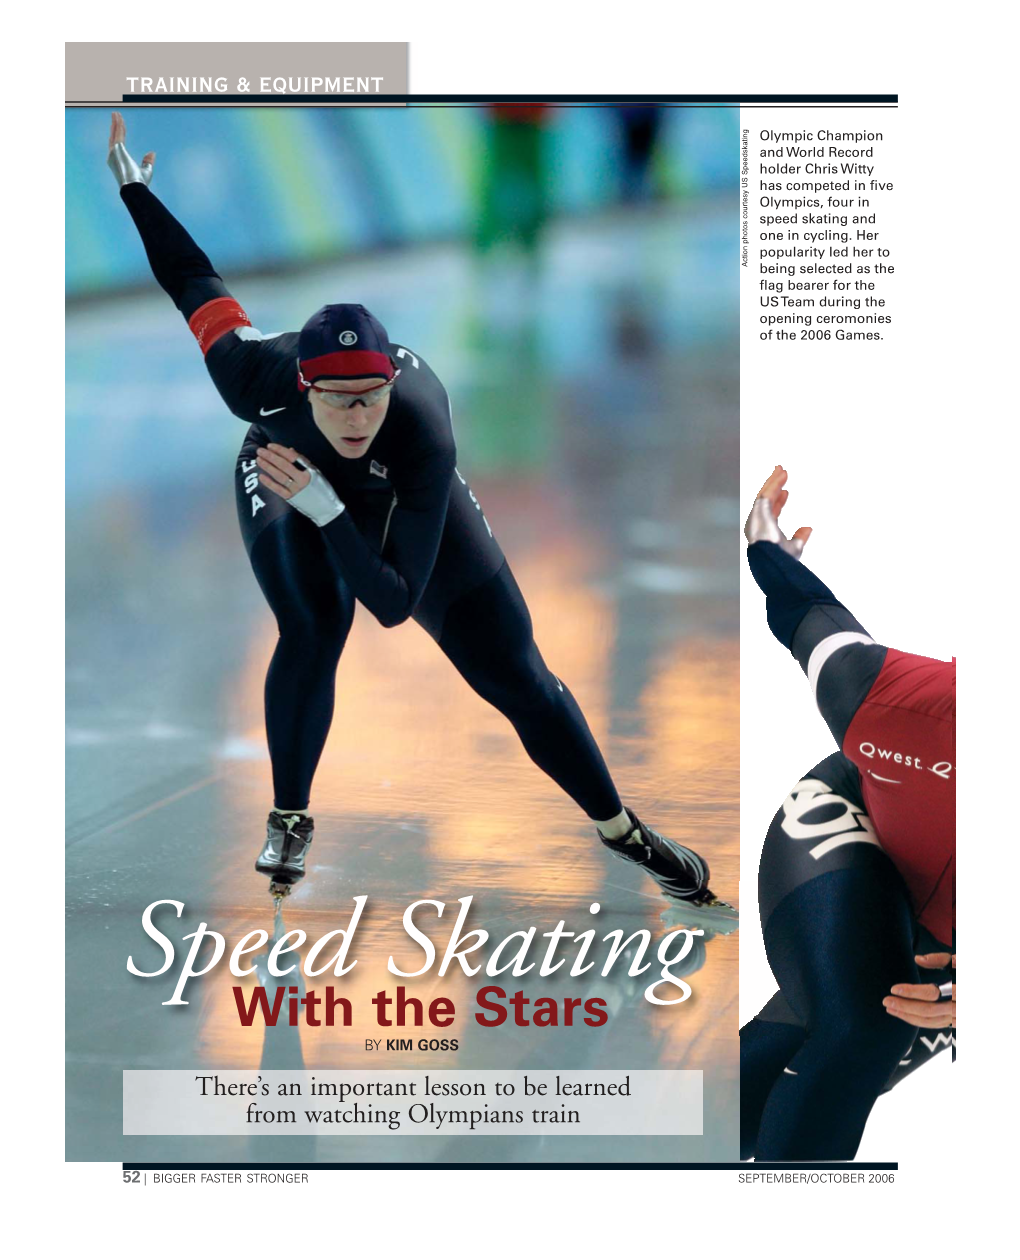 Speed Skating and One in Cycling